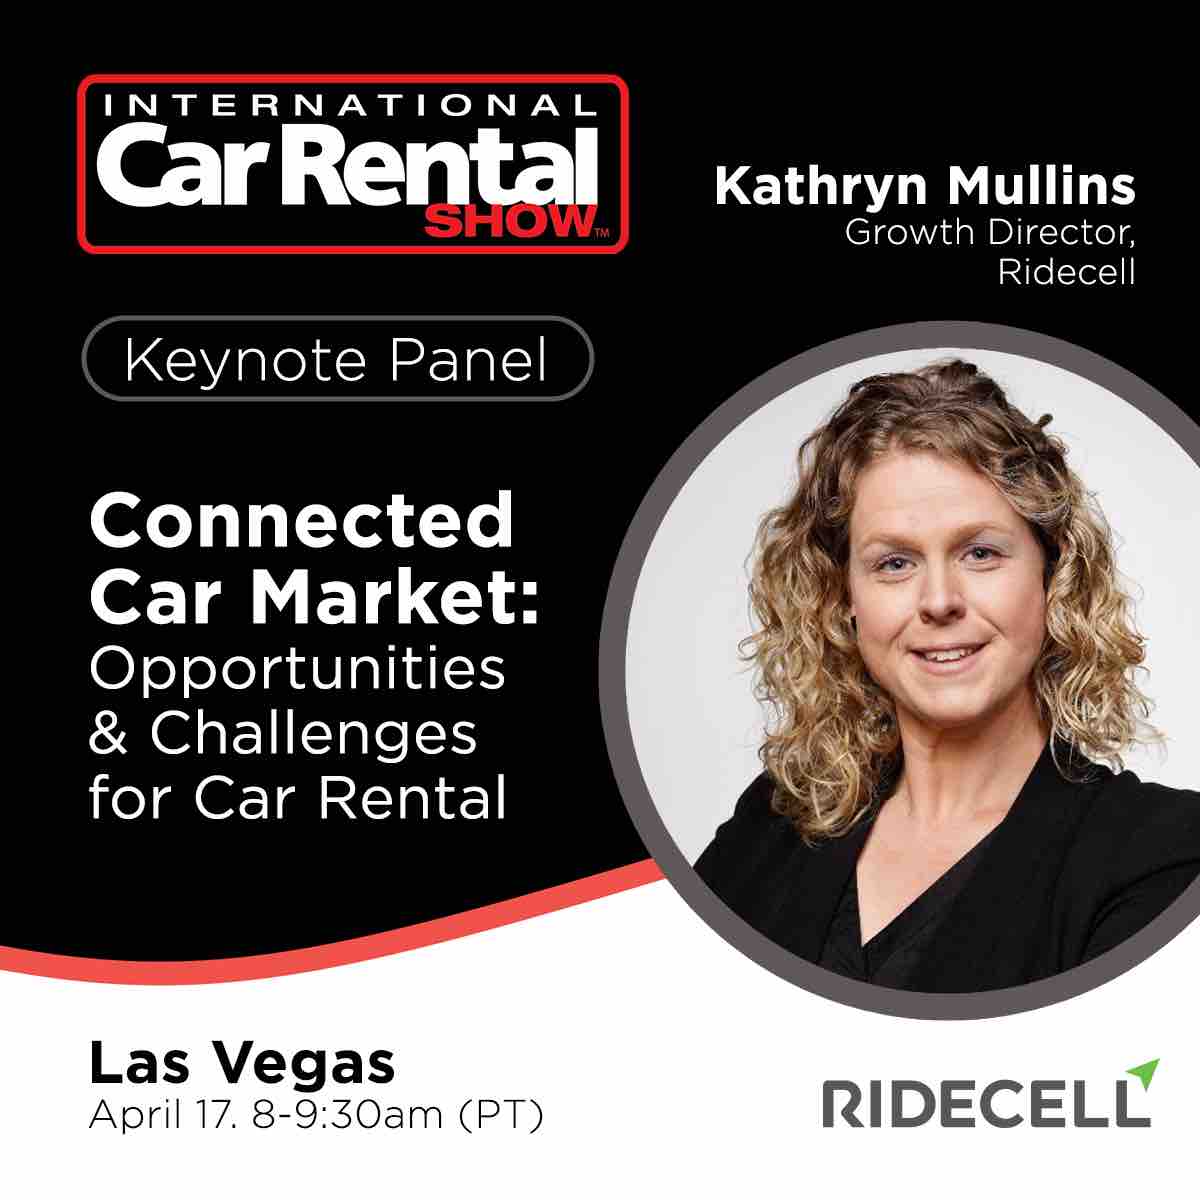 The global #carrental industry connects at #ICRS2024 and we’re excited to be part of it. Attending #ICRS too?Join us for a keynote panel tomorrow on challenges and opportunities in the #connectedcar market with Kathryn Mullins, growth director at Ridecell. internationalcarrentalshow.com